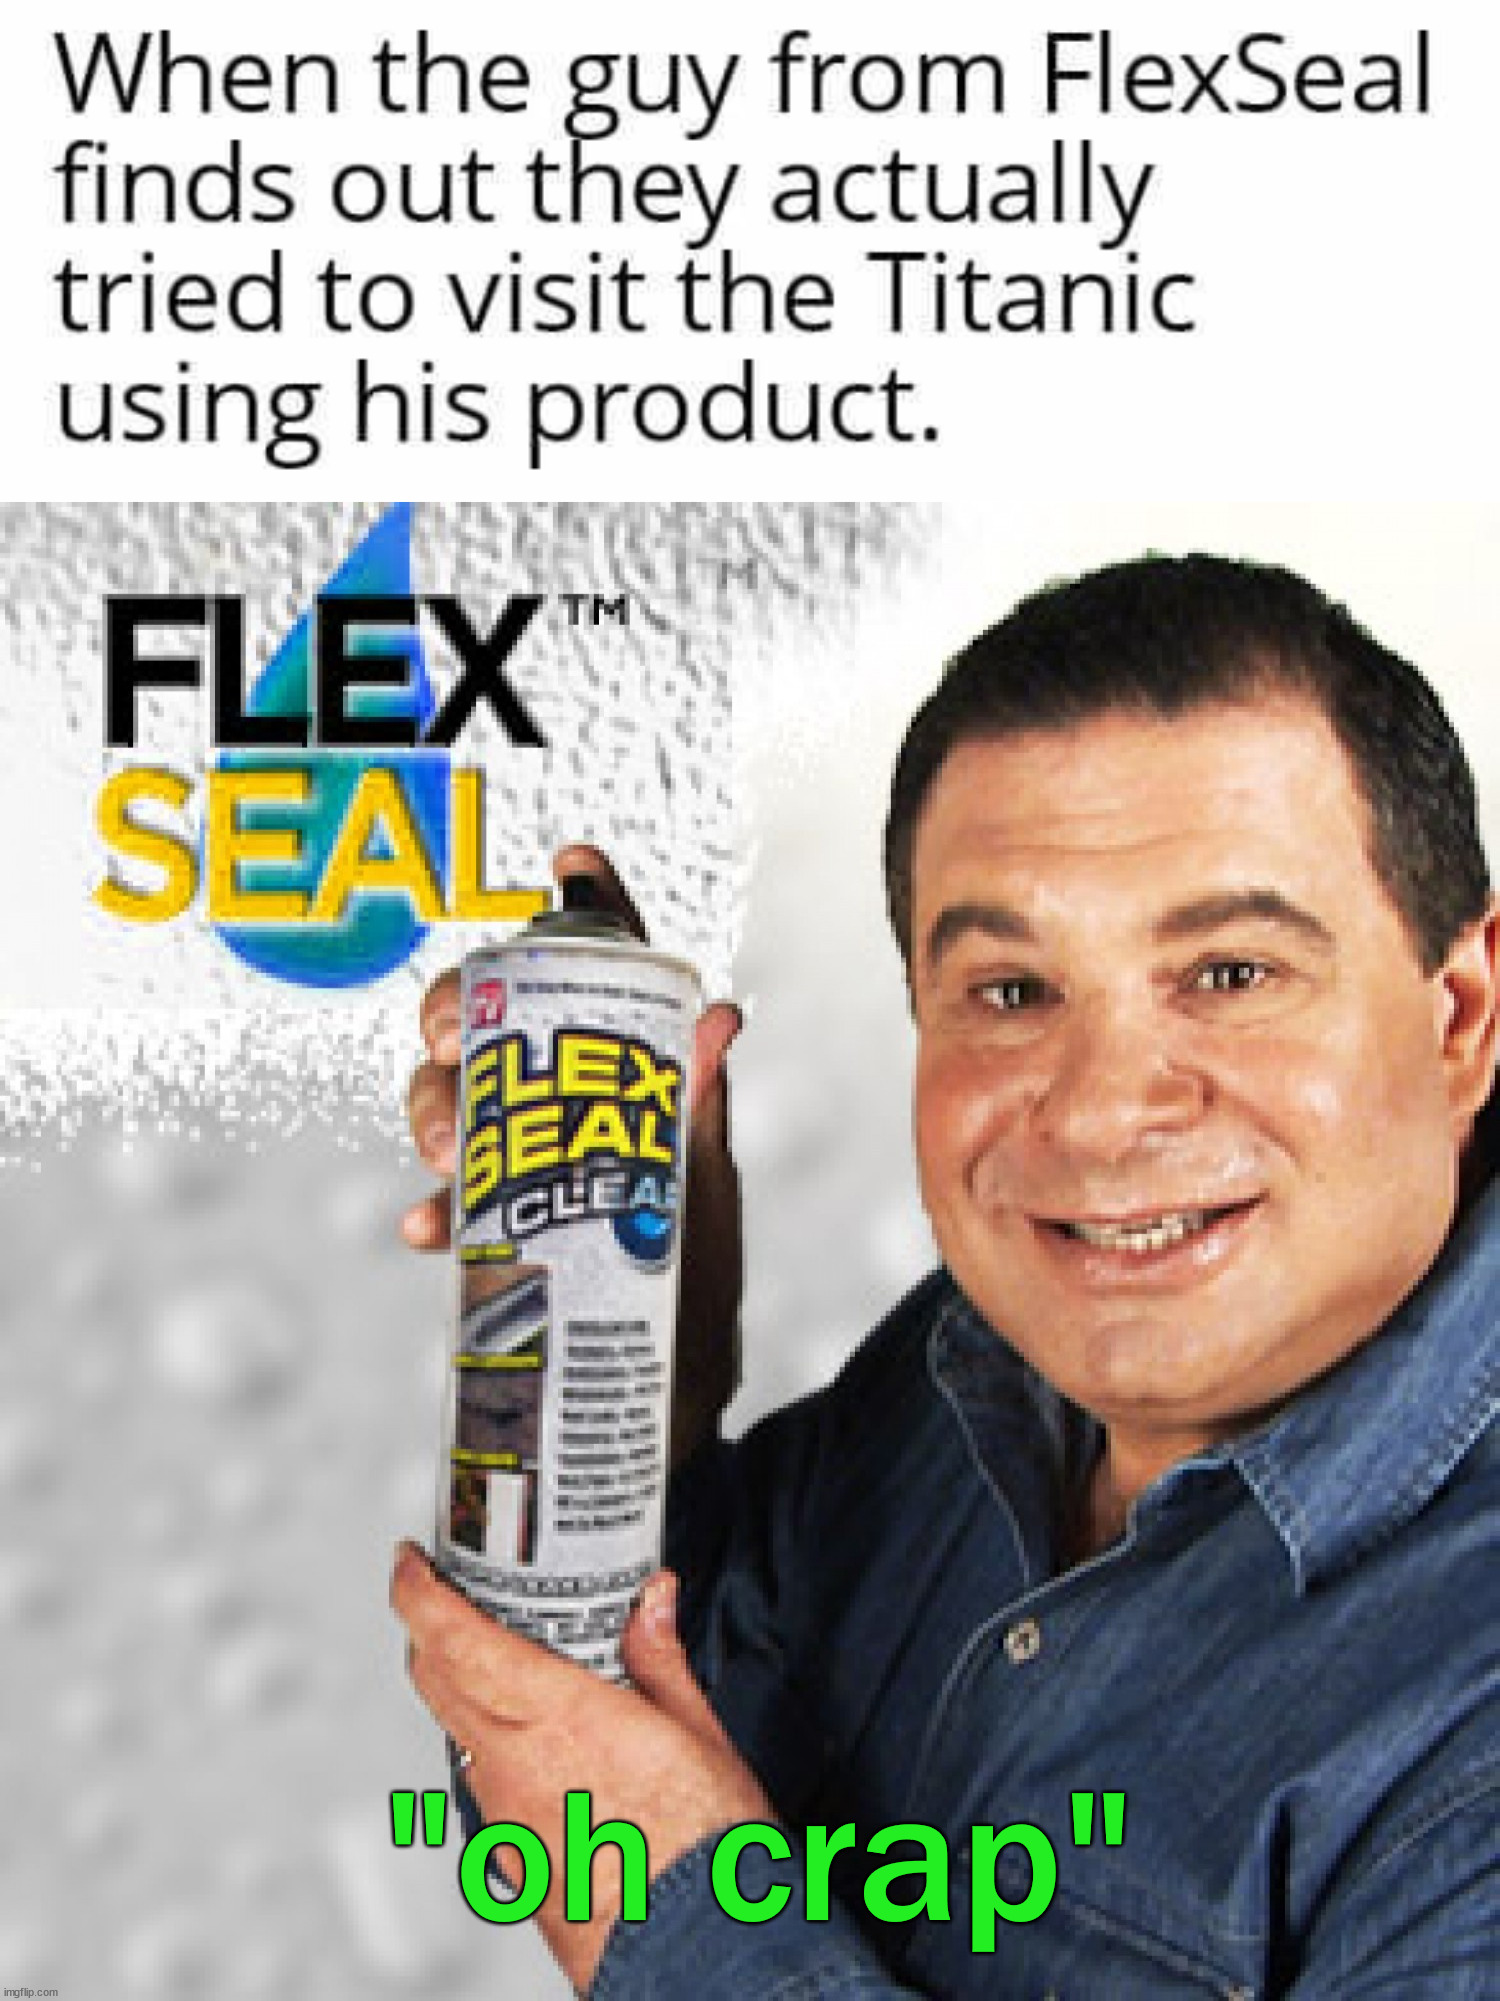 "oh crap" | image tagged in flex seal | made w/ Imgflip meme maker